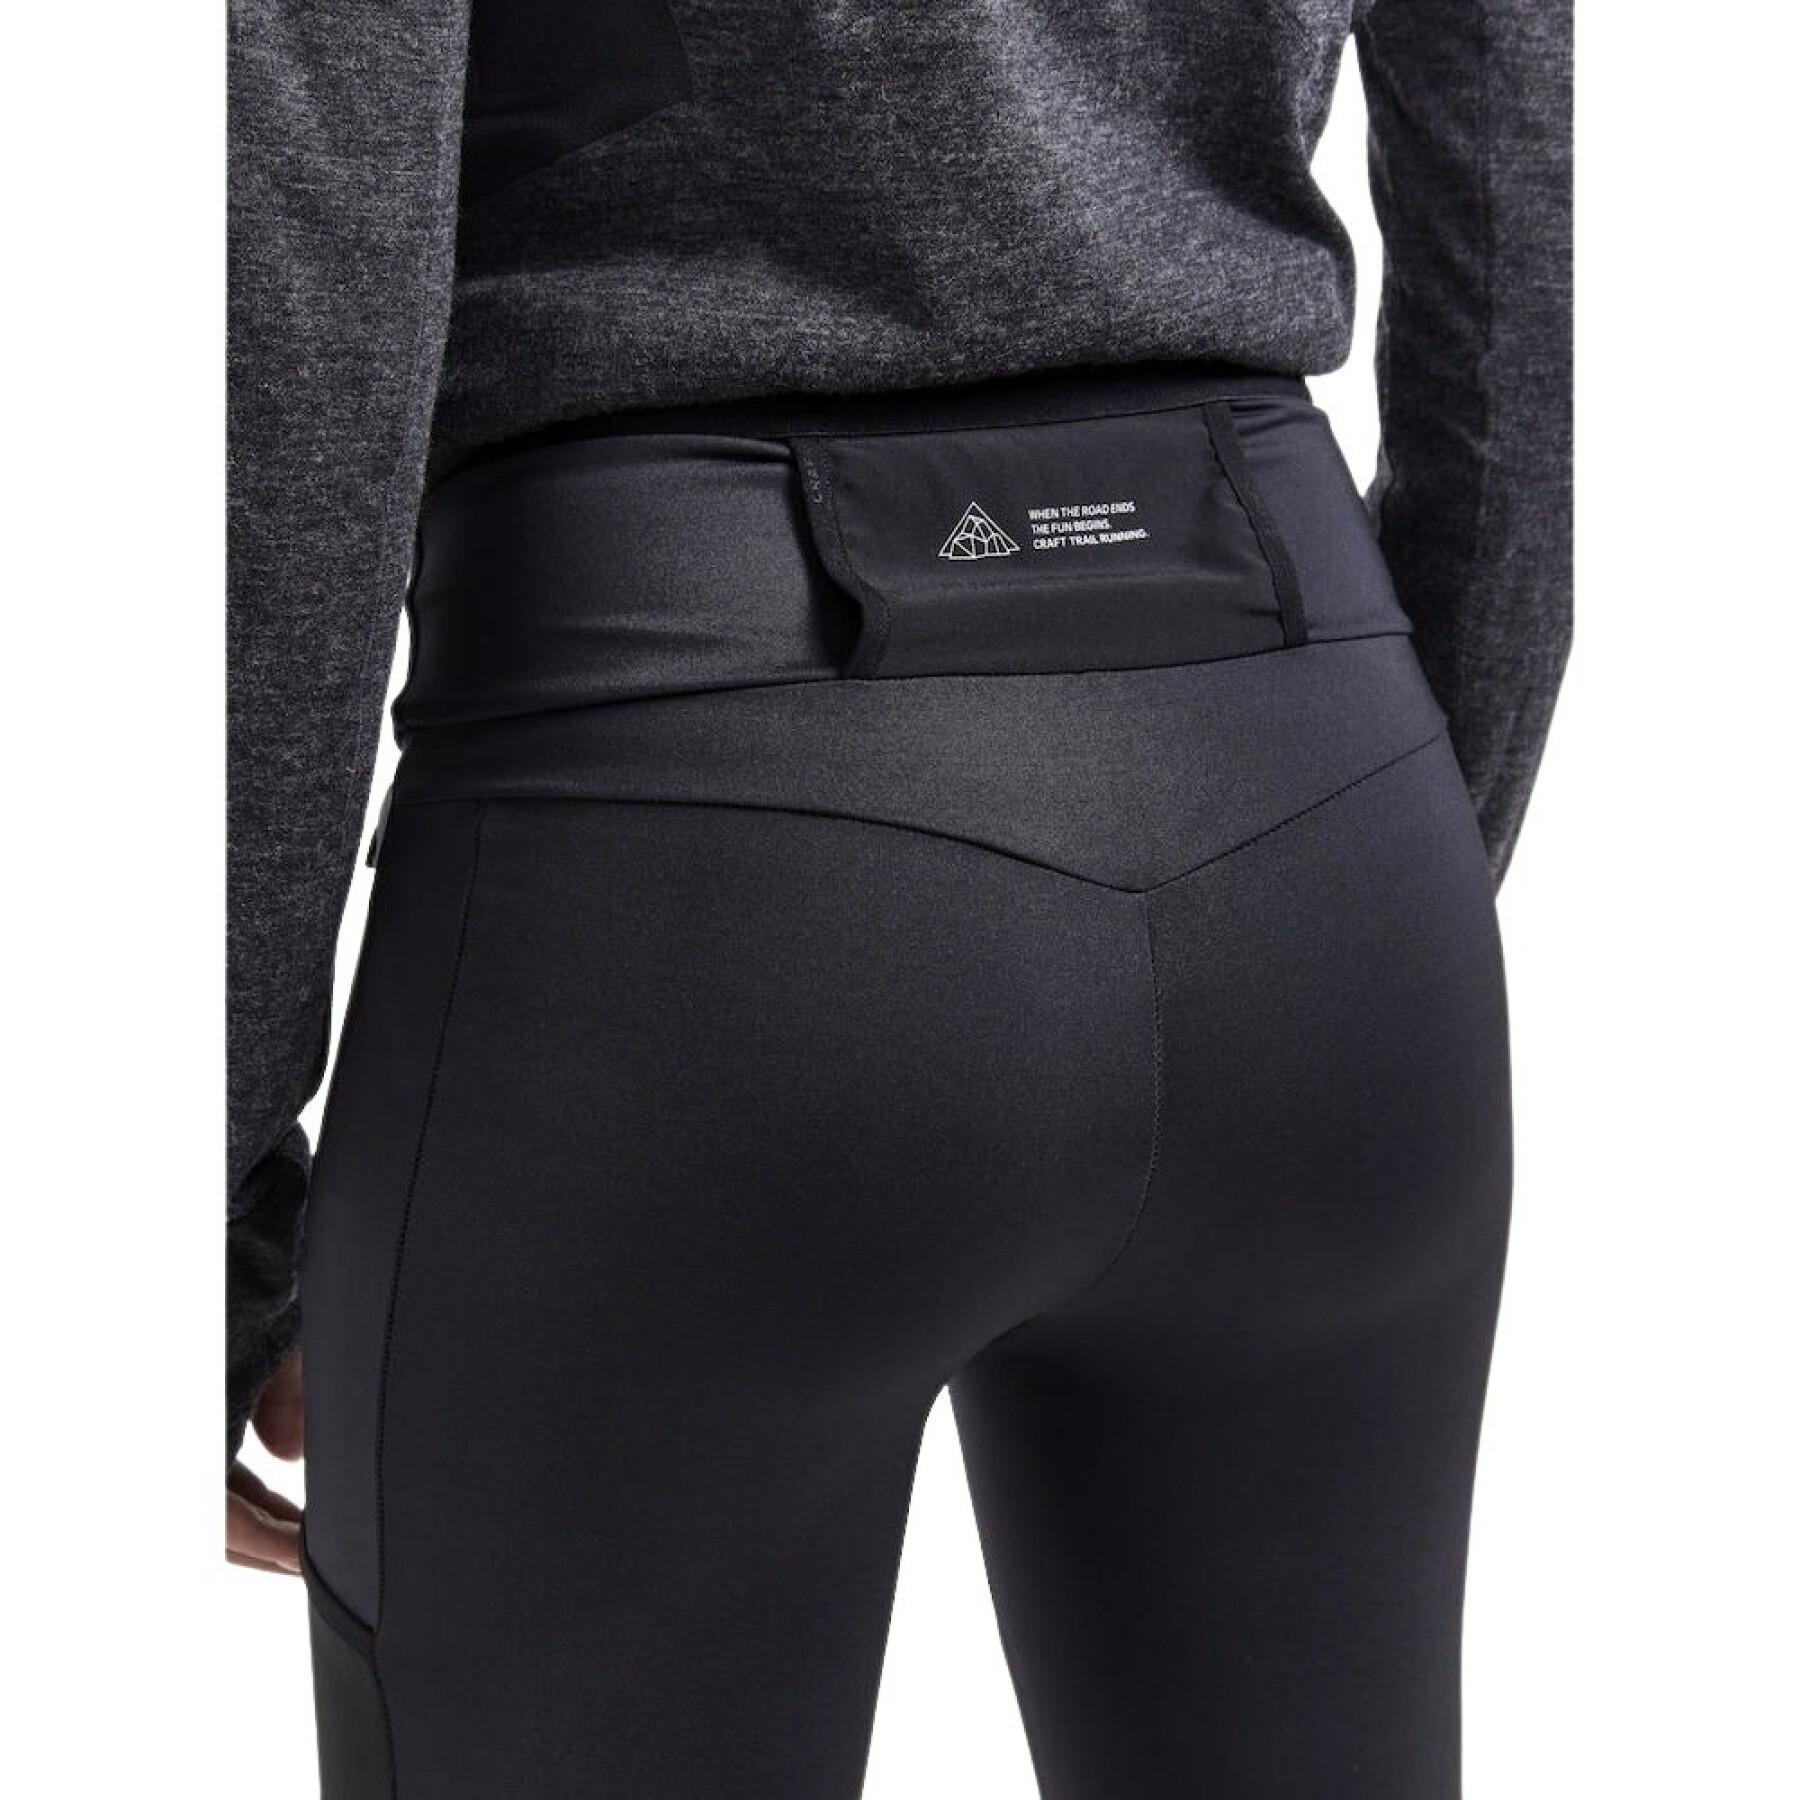 Women's Craft Pro Trail Tights, Free Shipping $99+